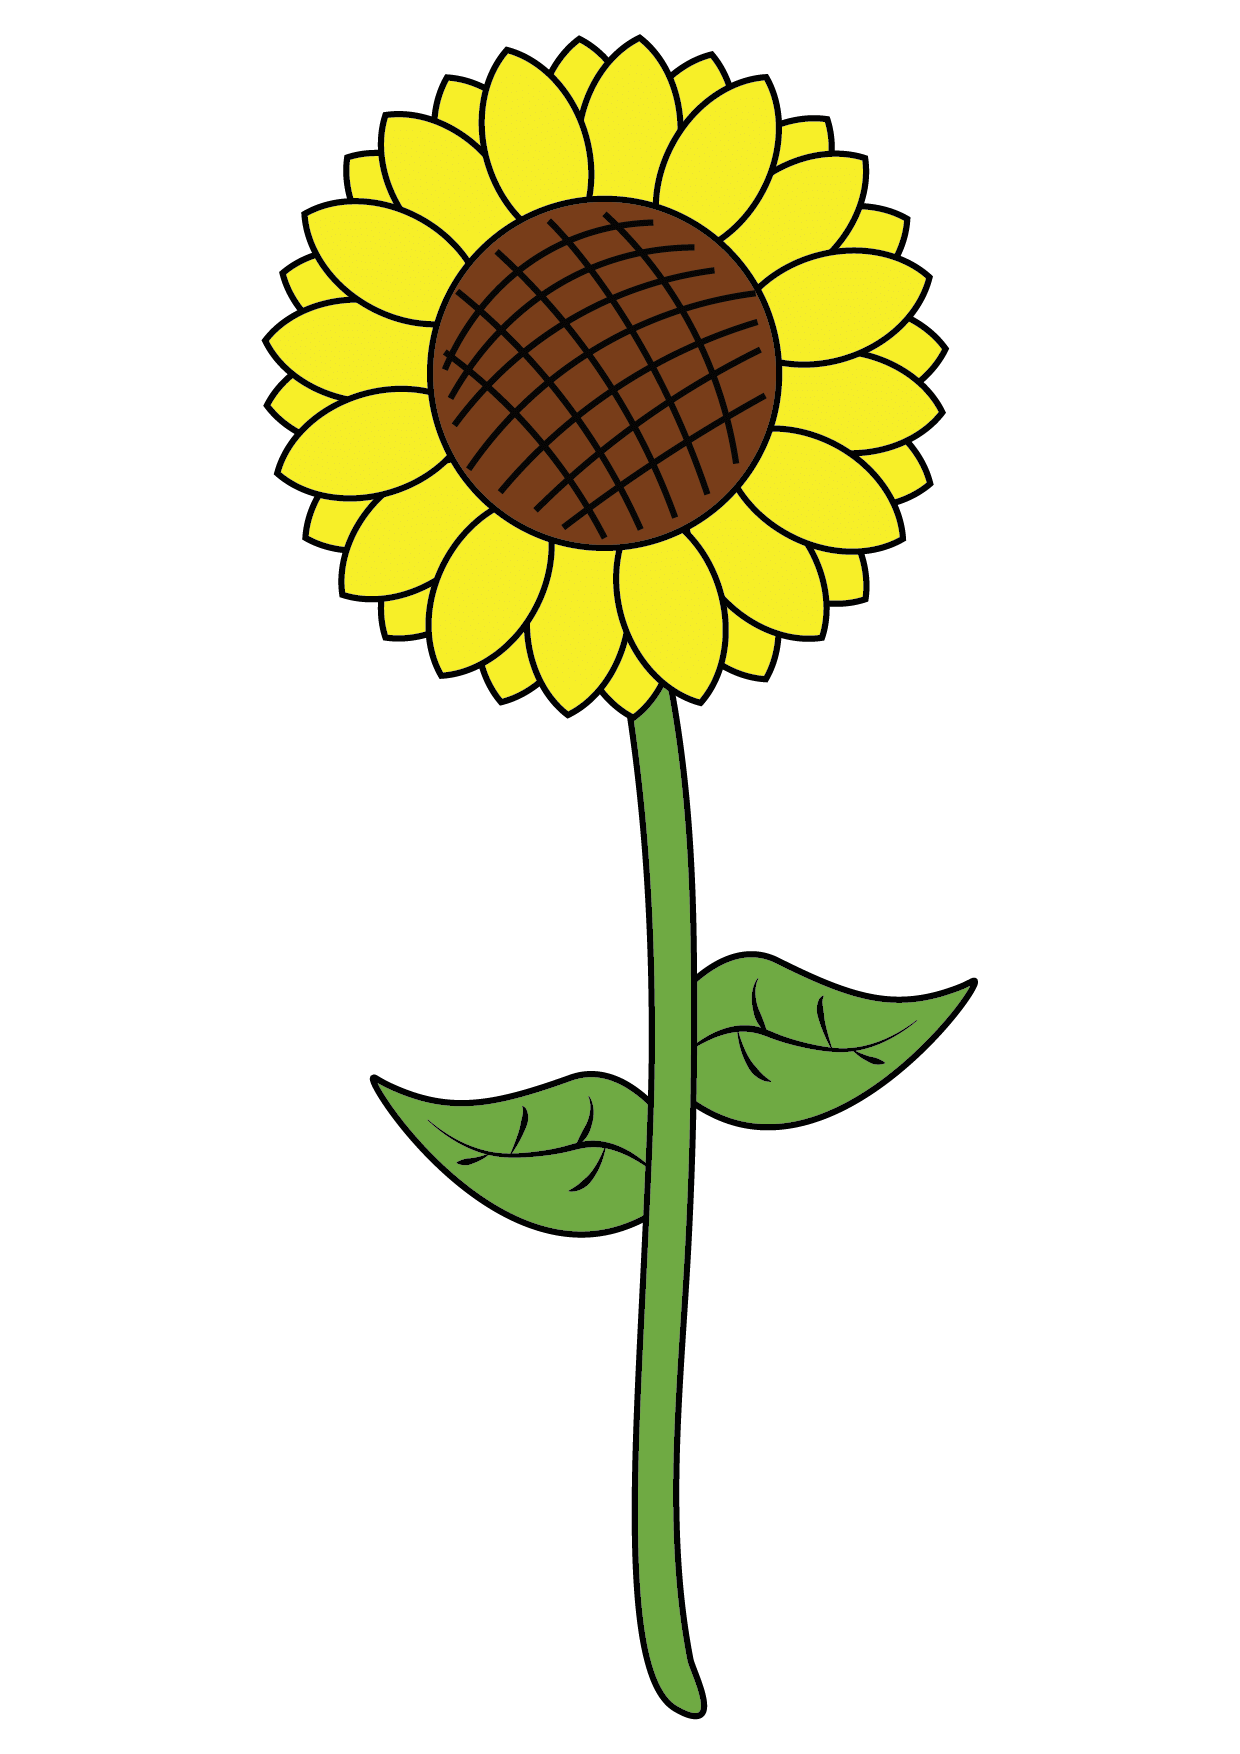 How to Draw A Sunflower Step by Step Printable